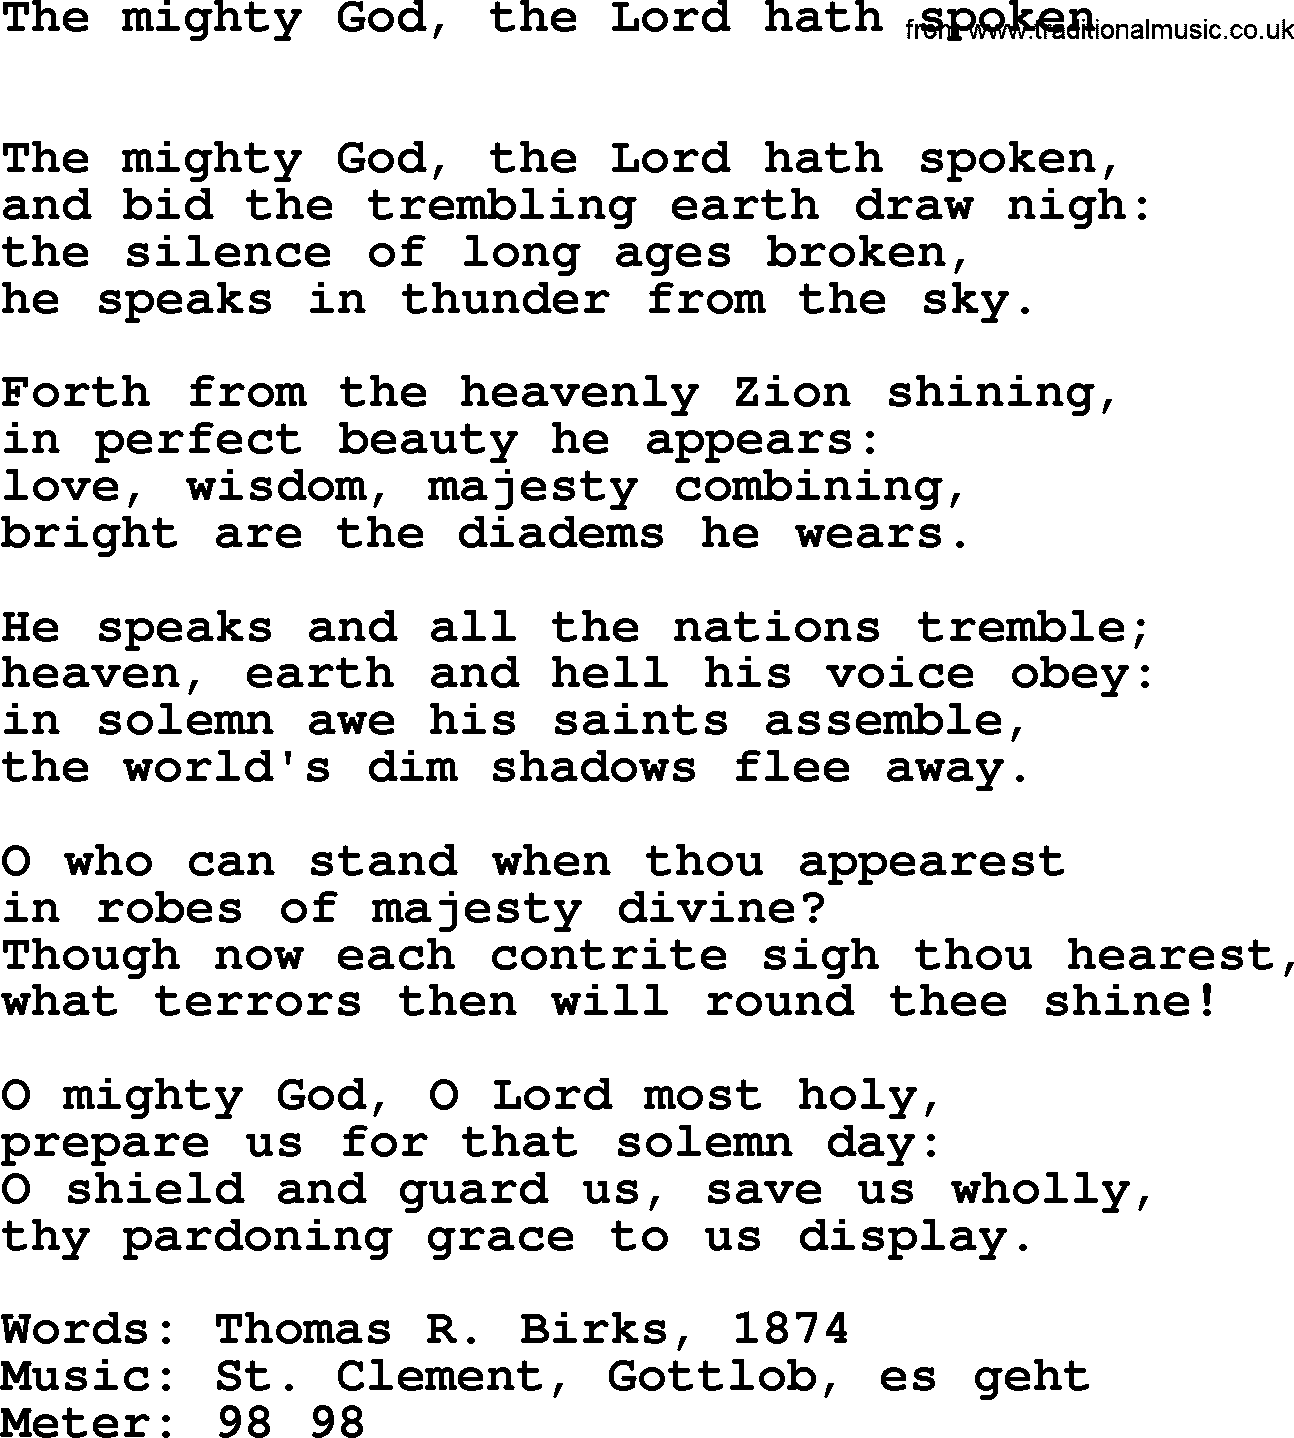 Book of Common Praise Hymn: The Mighty God, The Lord Hath Spoken.txt lyrics with midi music